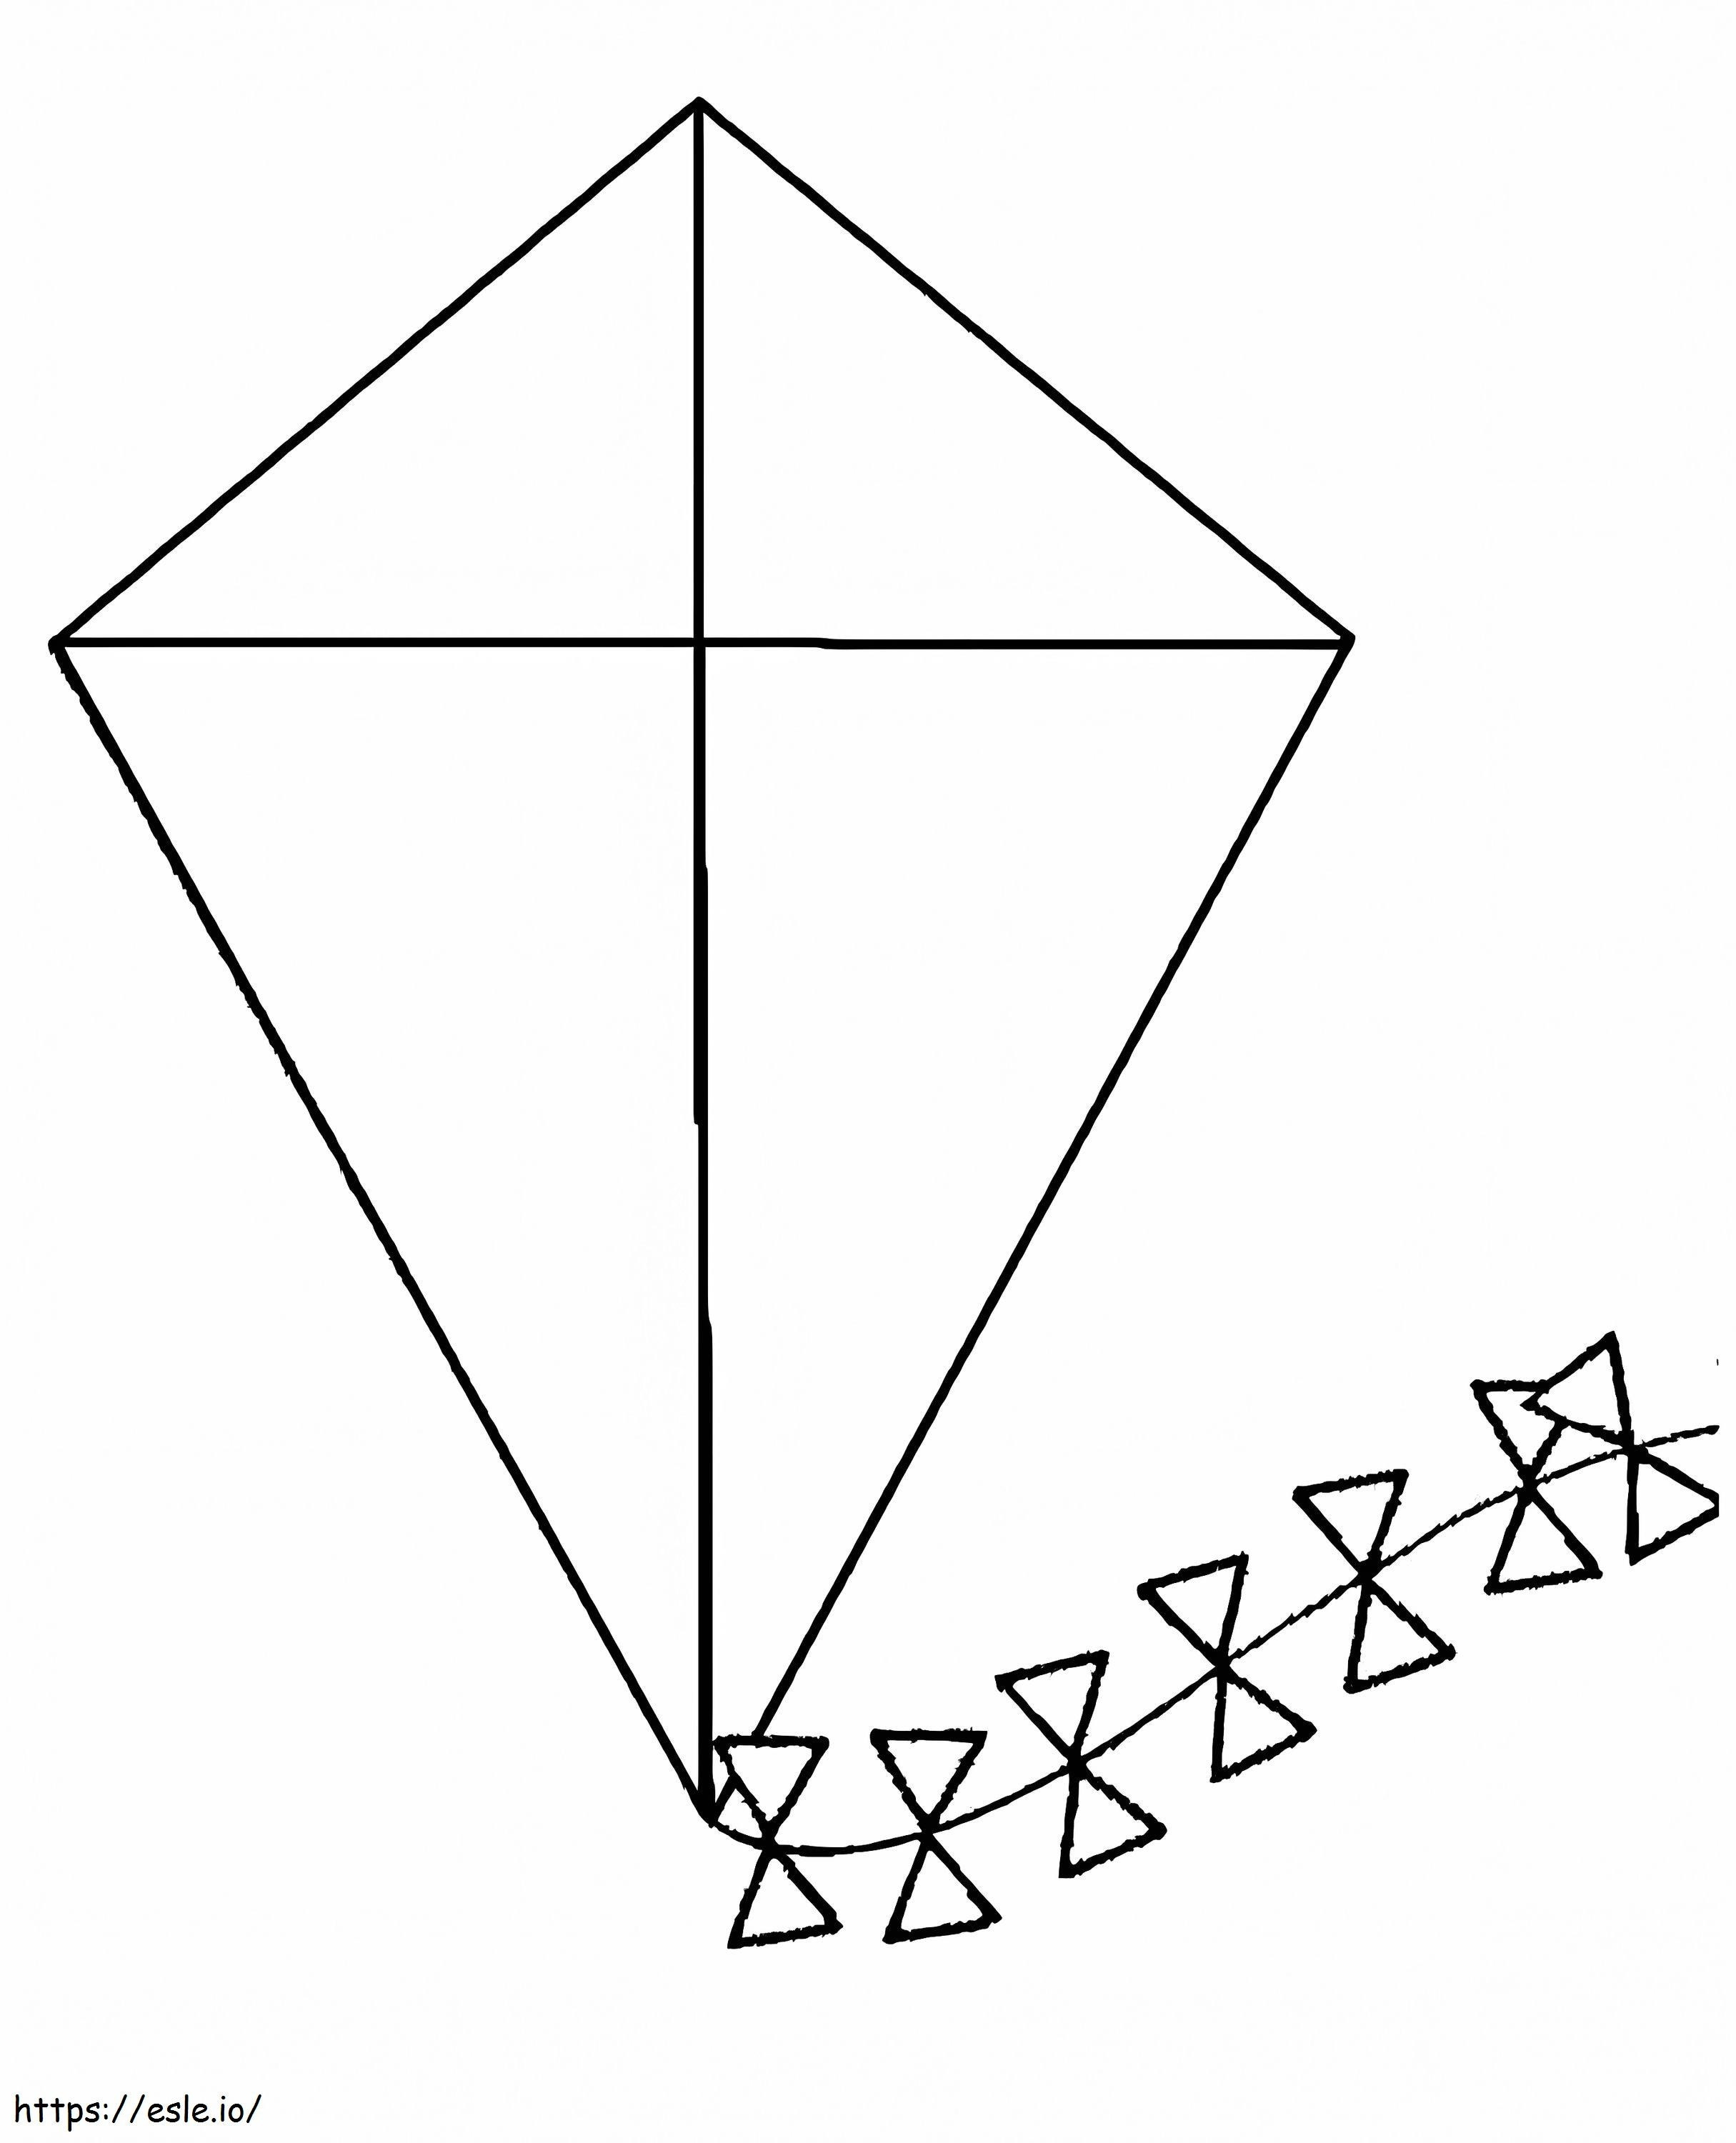 A Kite coloring page